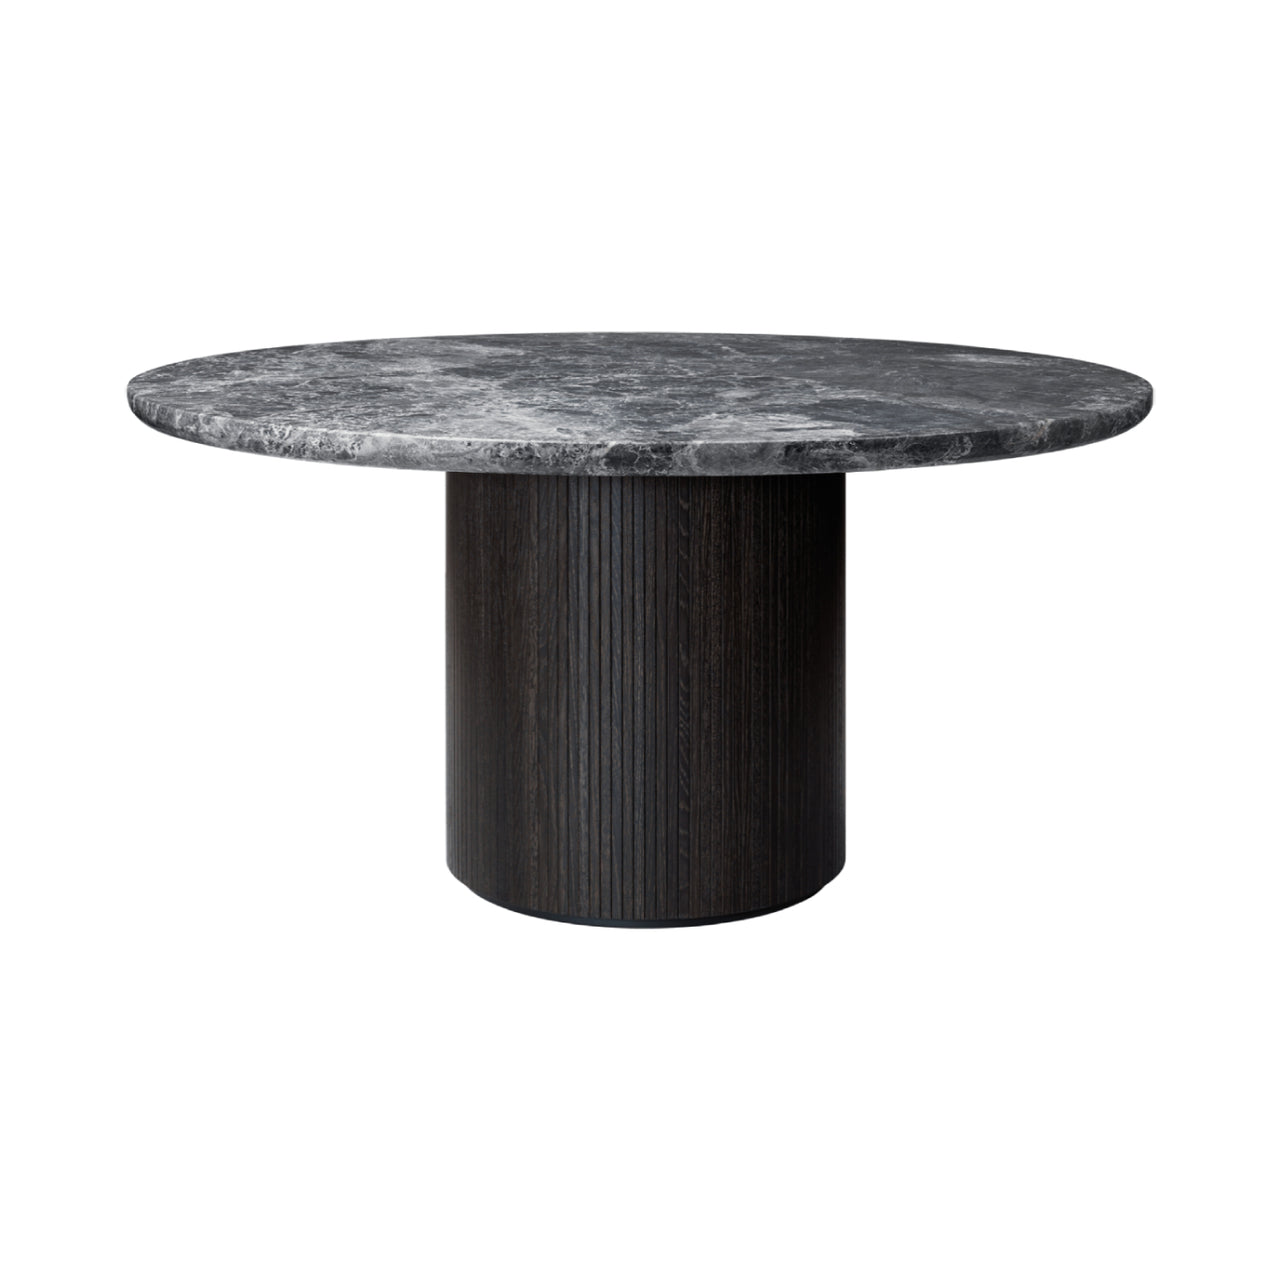 Moon Round Dining Table: Marble Top + Large - 59.1